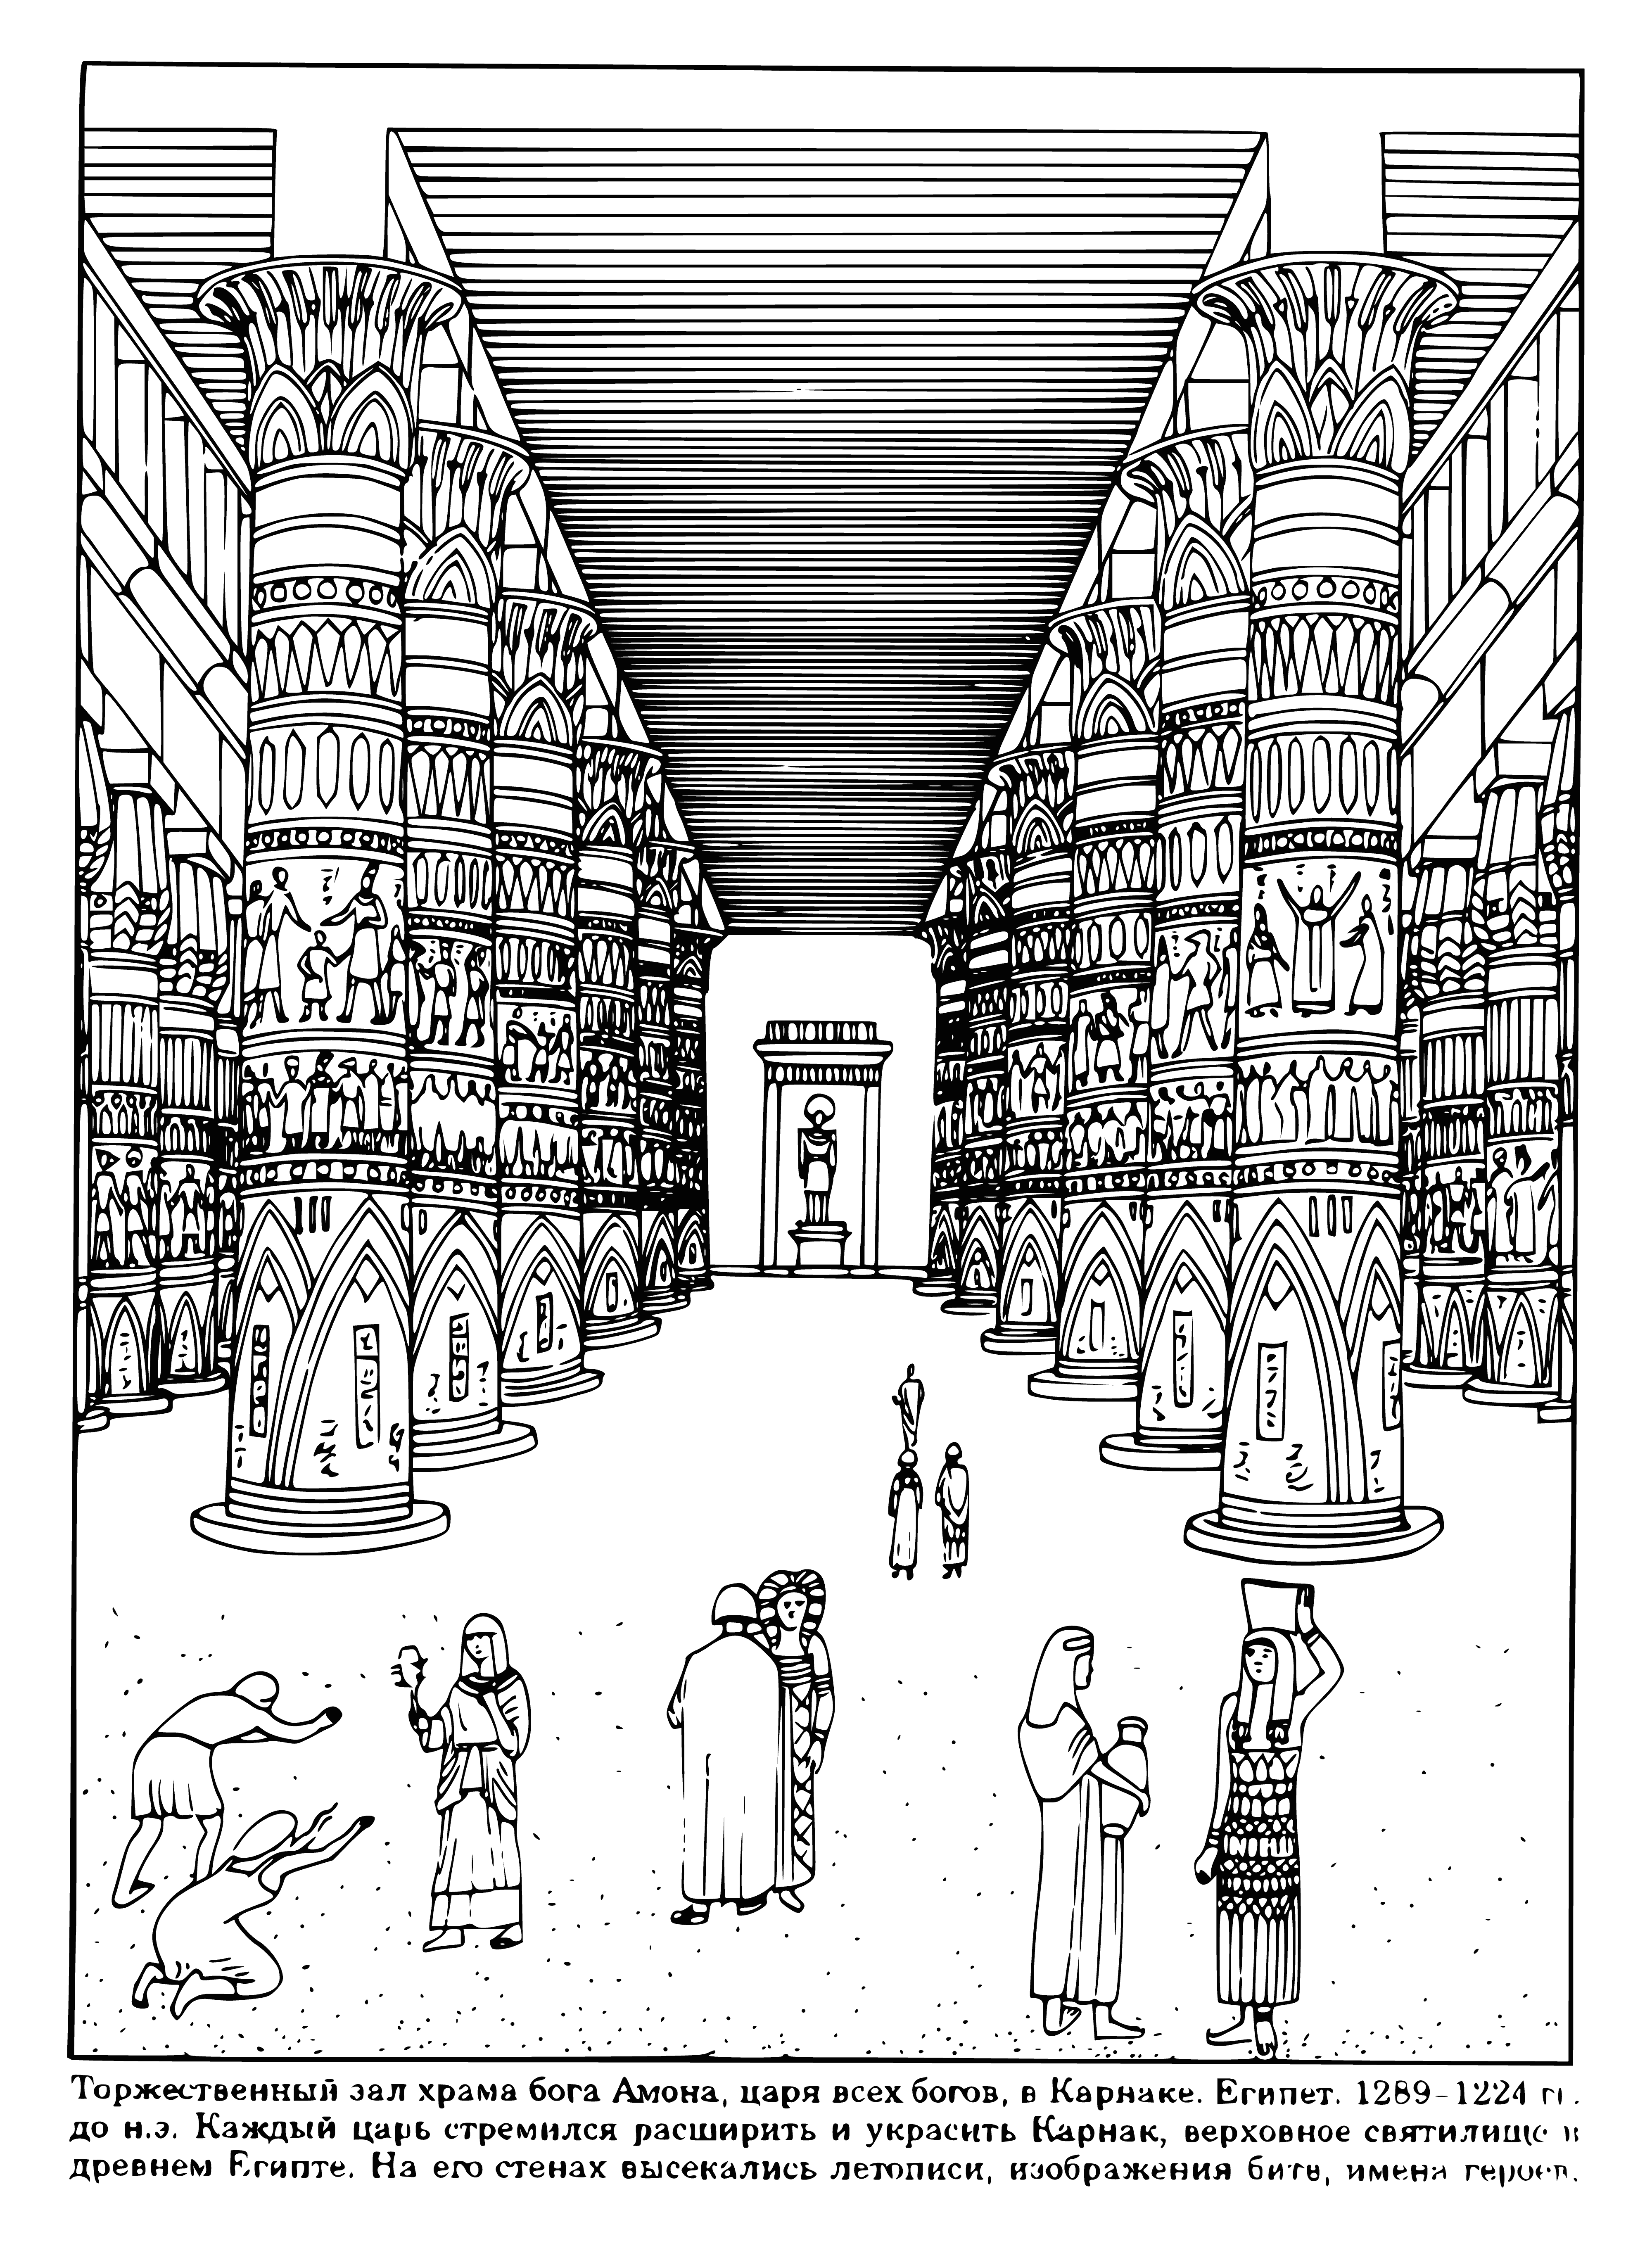 coloring page: Ancient world worshippers built the Temple of Amon, one of the most important places in the Ancient world. It had many rooms and was decorated with statues, paintings and other beautiful artifacts.